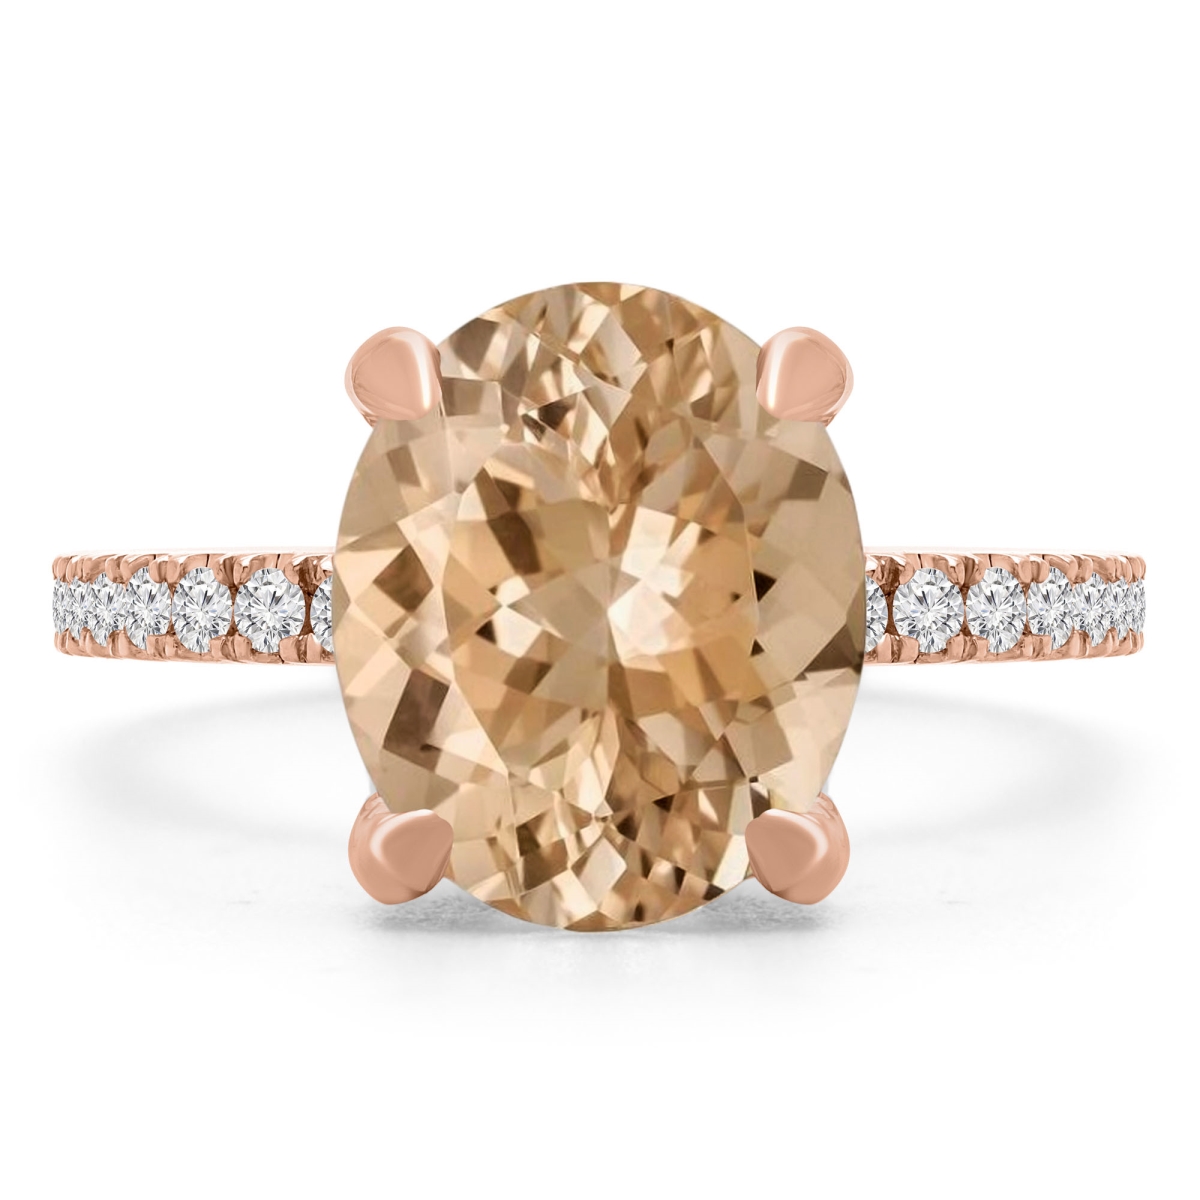 Picture of Majesty Diamonds MD190408-5.25 3.4 CTW Oval Pink Morganite Under Halo Engagement Ring in 14K Rose Gold - Size 5.25